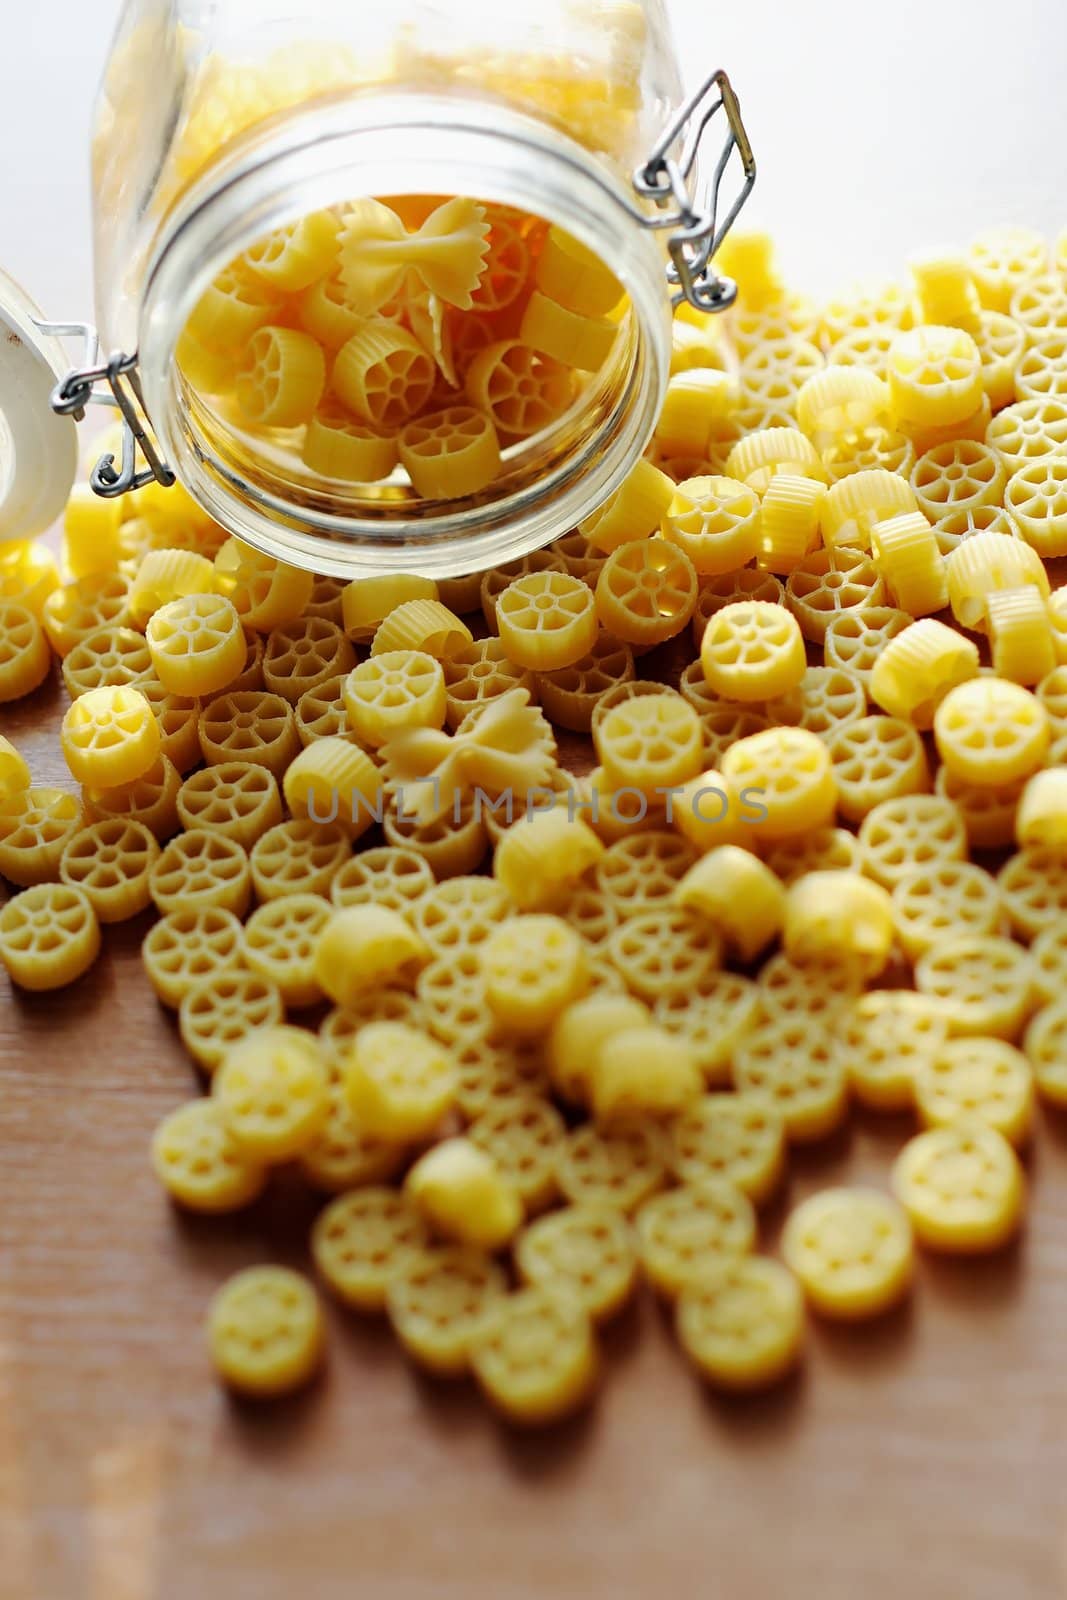 An image of yellow pasta on the kitchen table